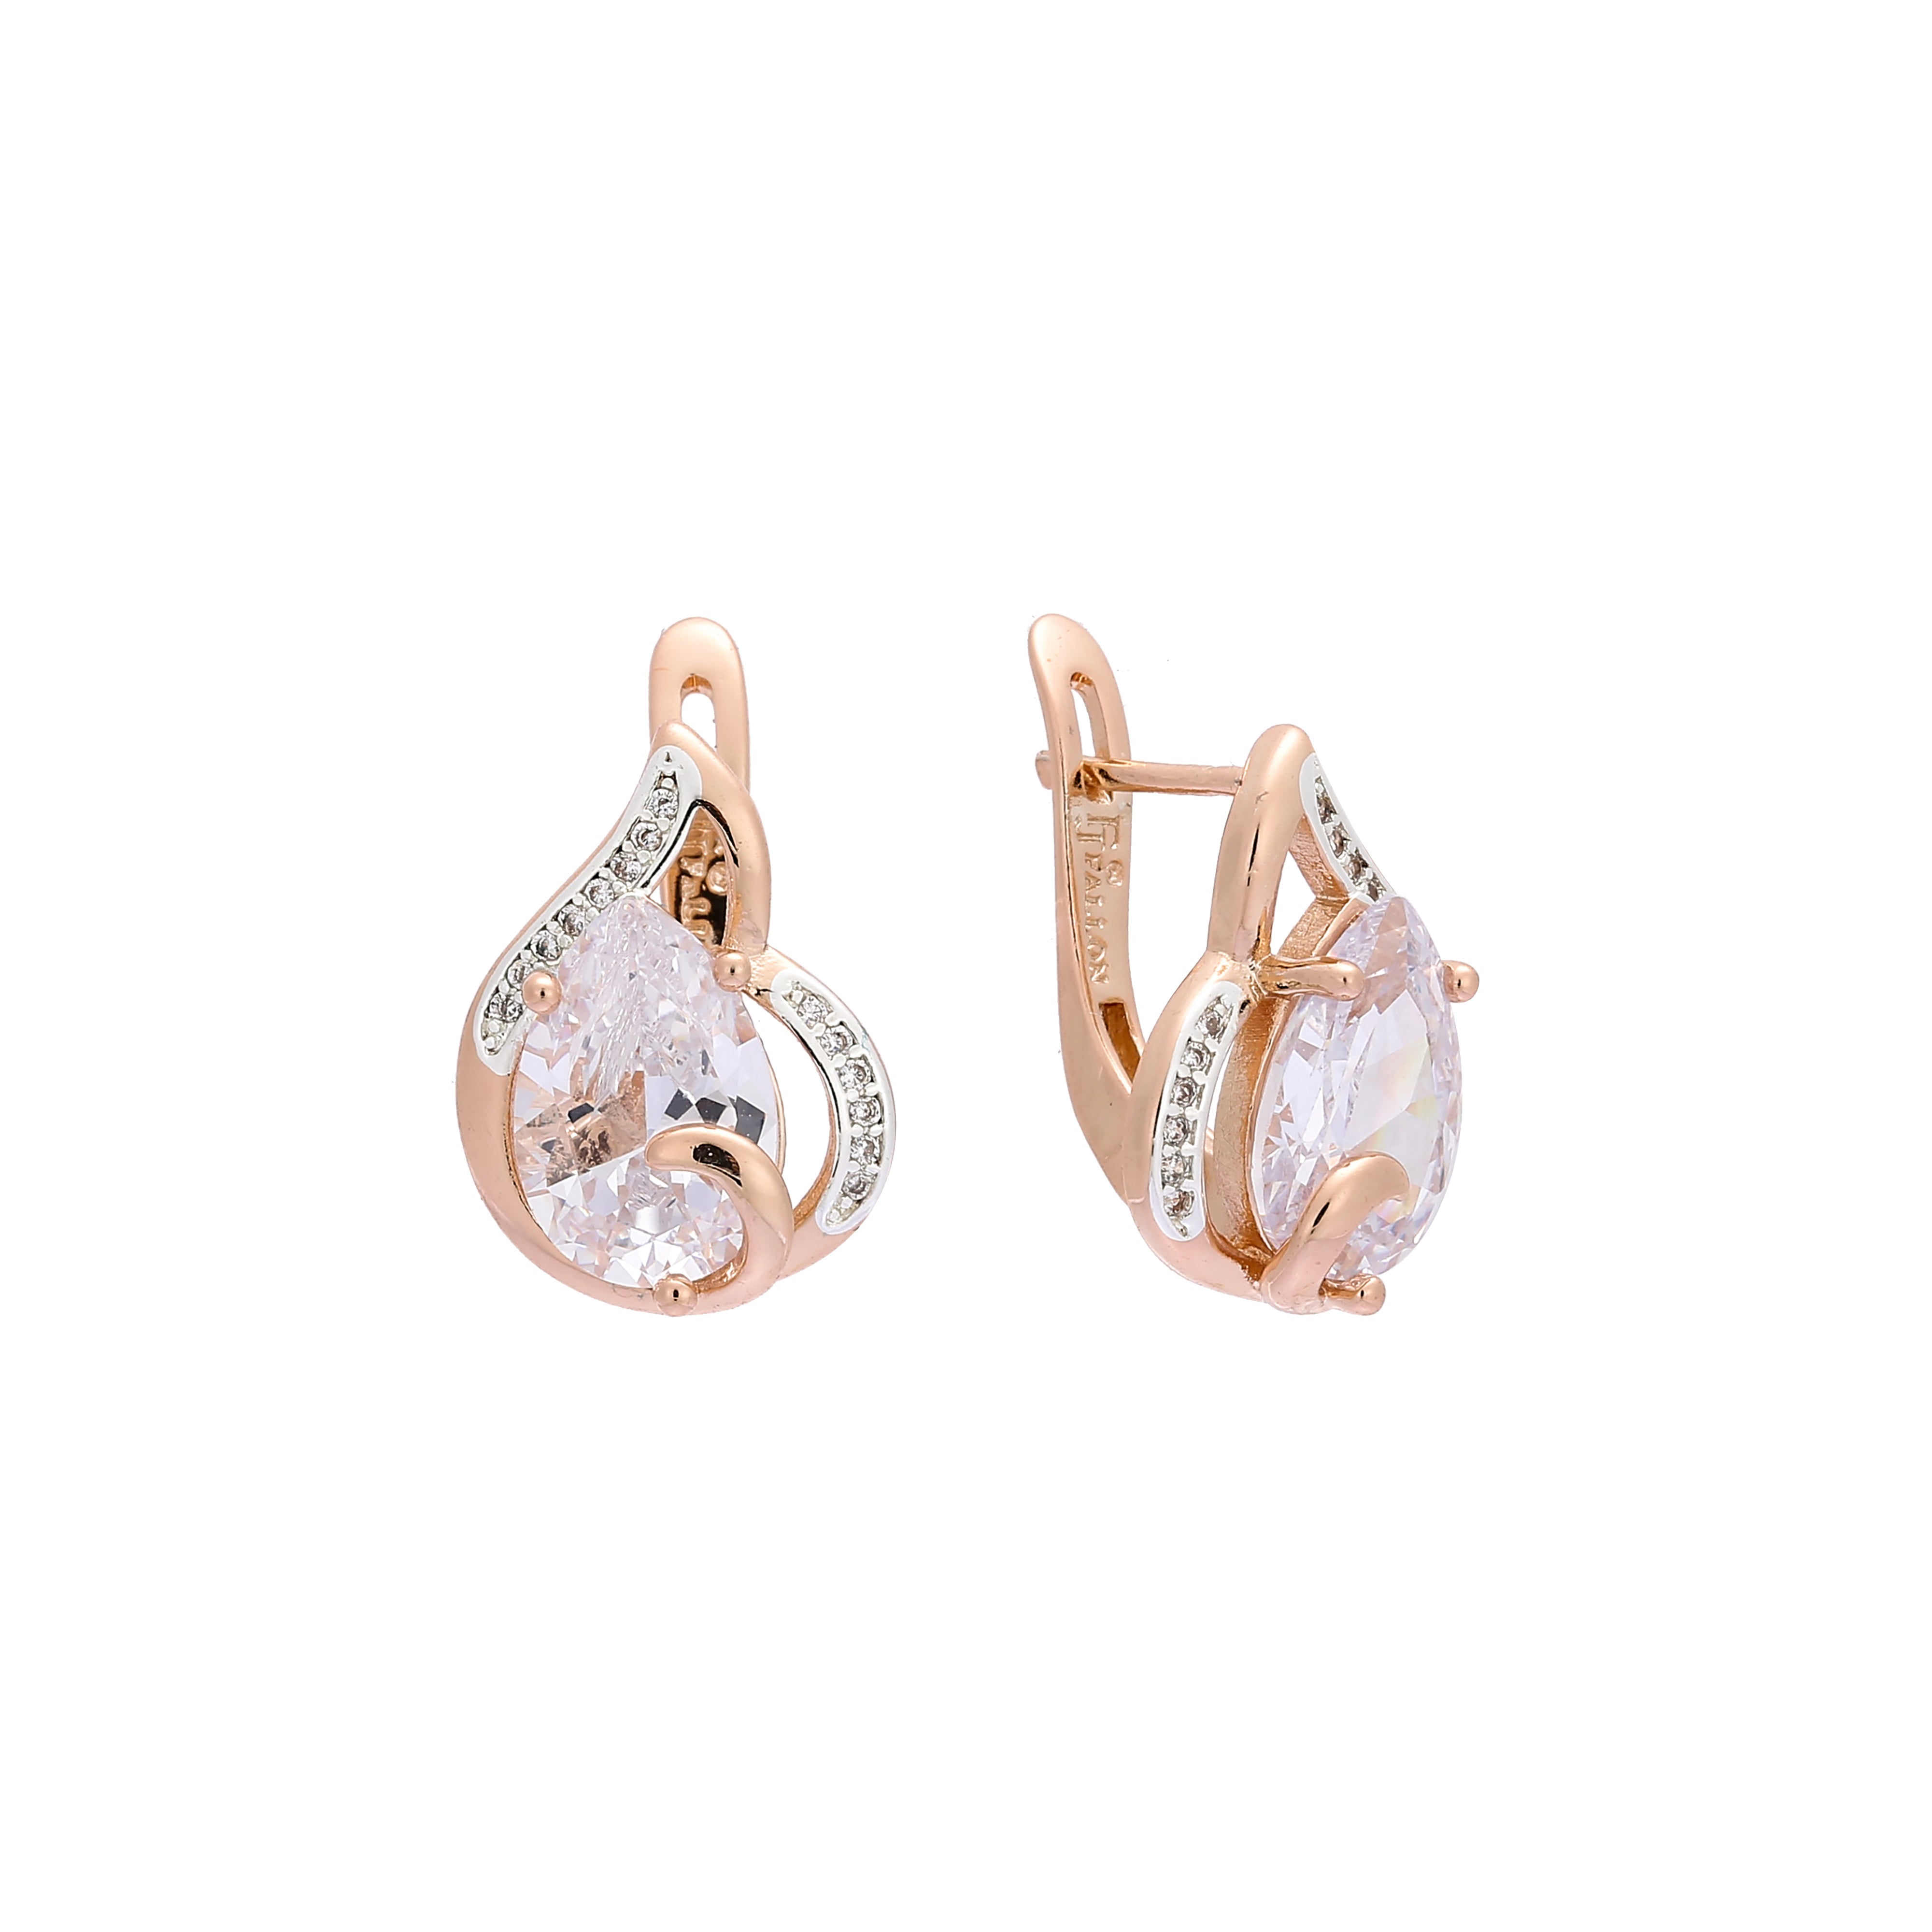 Solitaire teardrop earrings in Rose Gold, two tone plating colors